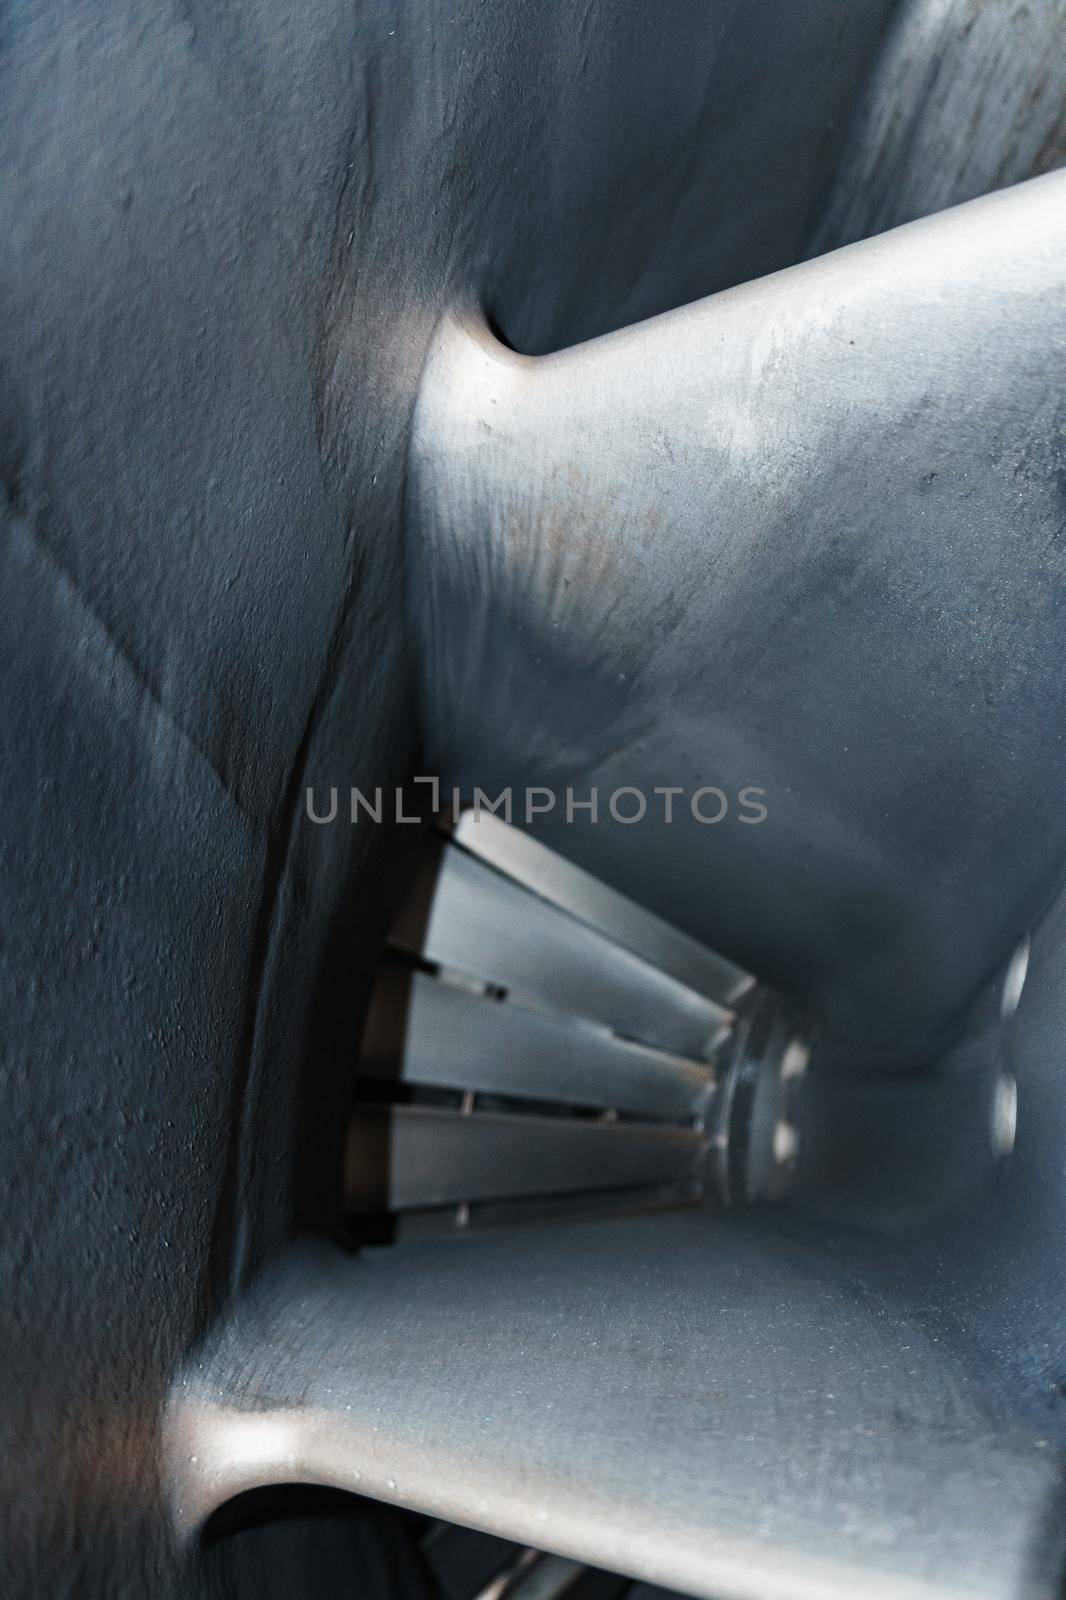 The blades and the flow part inside the gas turbine. Jet engine fan blade from inside